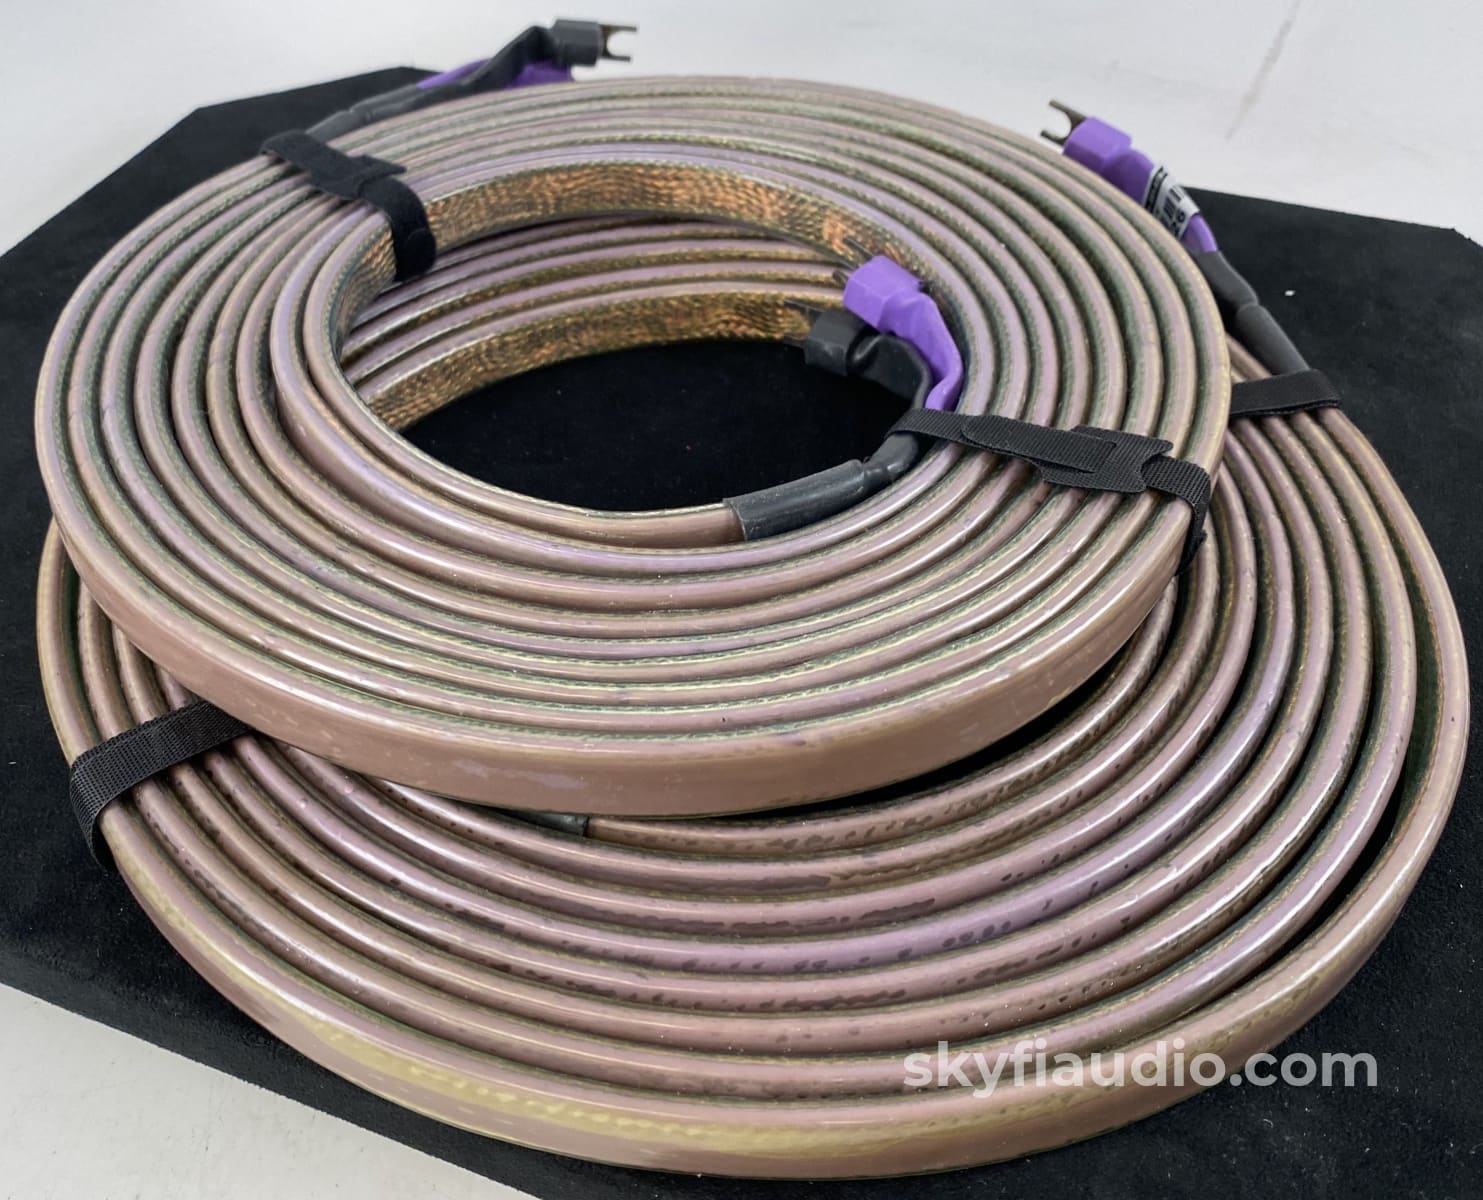 Pro Power Oval 10 Cable - Analysis Plus